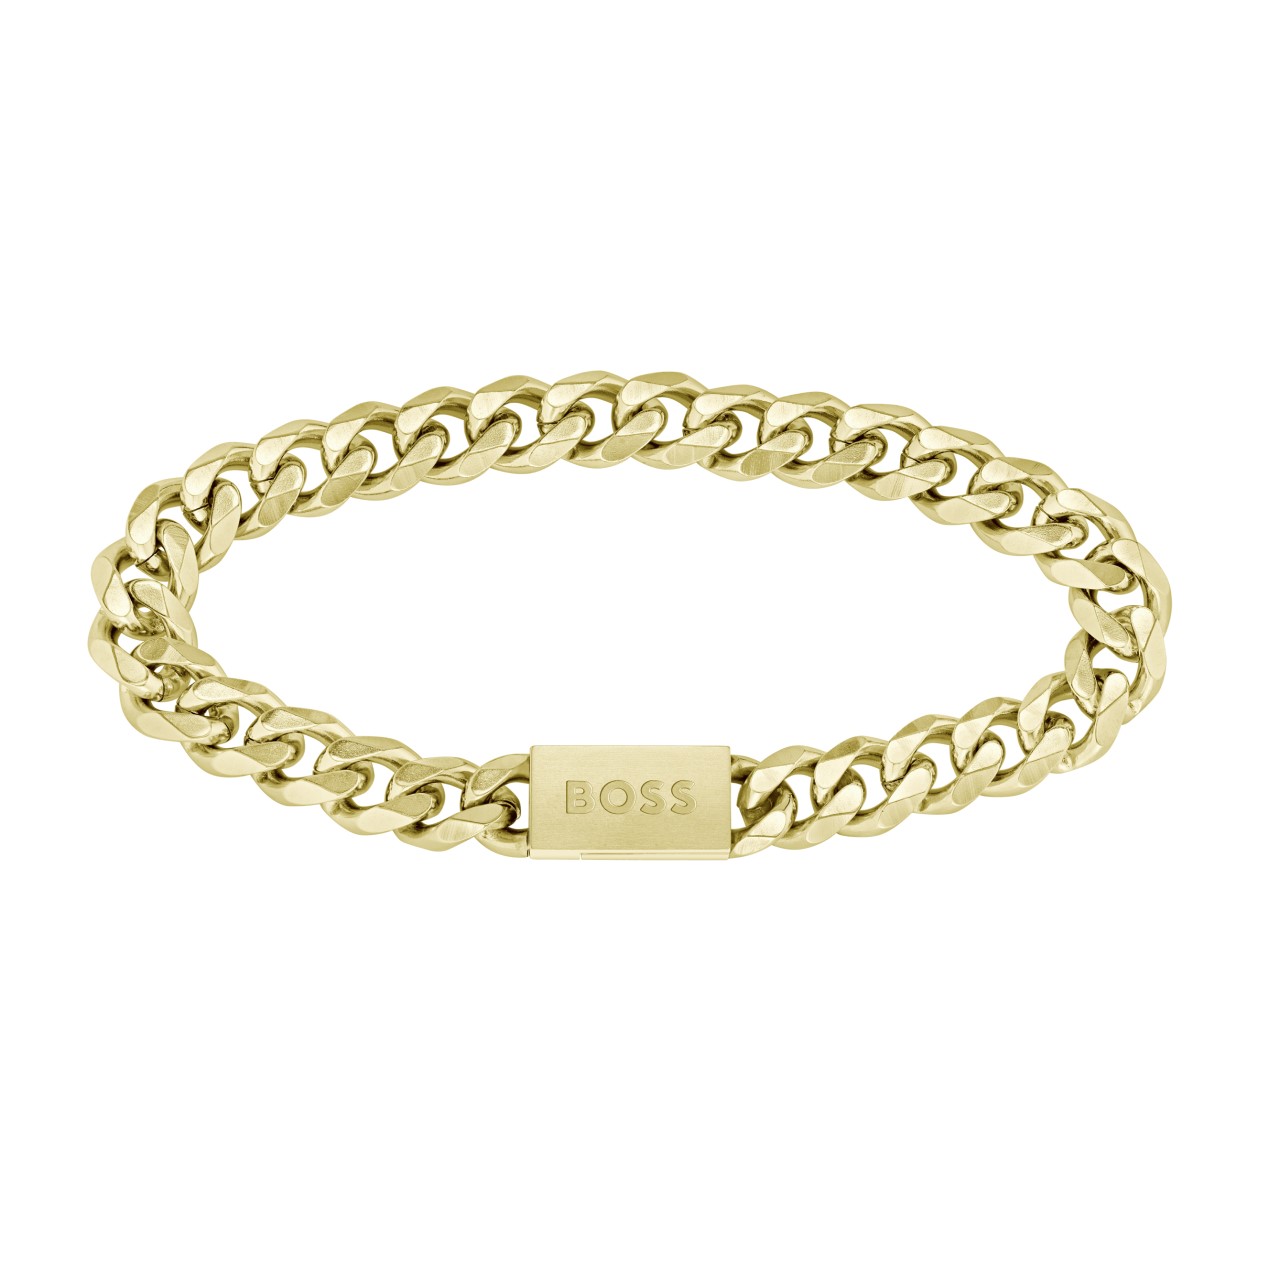 Hugo Boss Gents Thad Classic Braided Black Leather Bracelet 1580468M -  Obsessions Jewellery